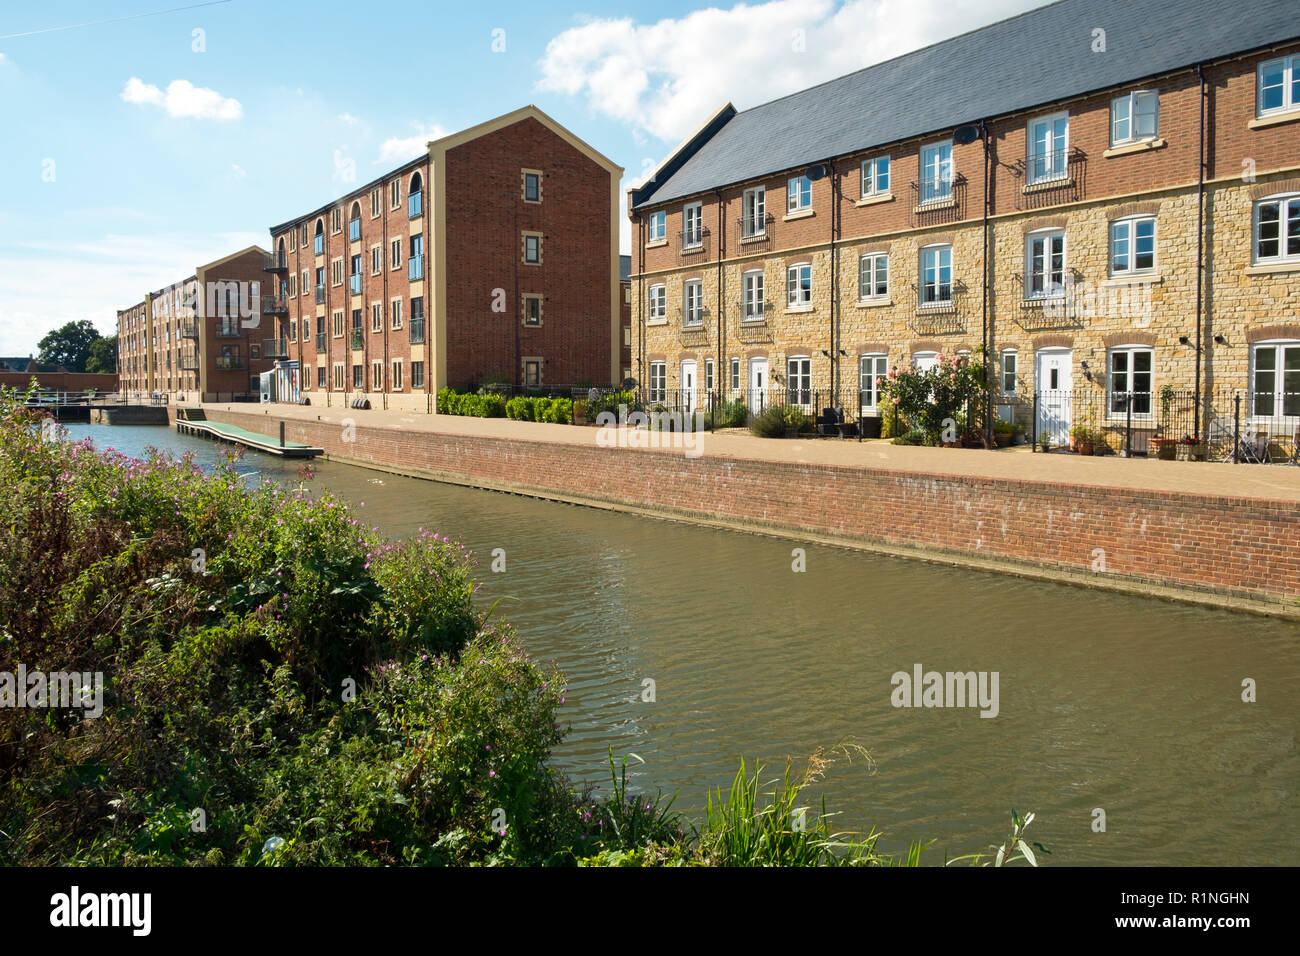 Stroud, Gloucestershire, UK - 26th August 2016: Summer sunshine brings people out to enjoy the regenerated Stroudwater Canal project at Ebley, Stroud, Gloucestershire, UK. Recently built housing enhances the waterside near historic Ebley Mill. Stock Photo